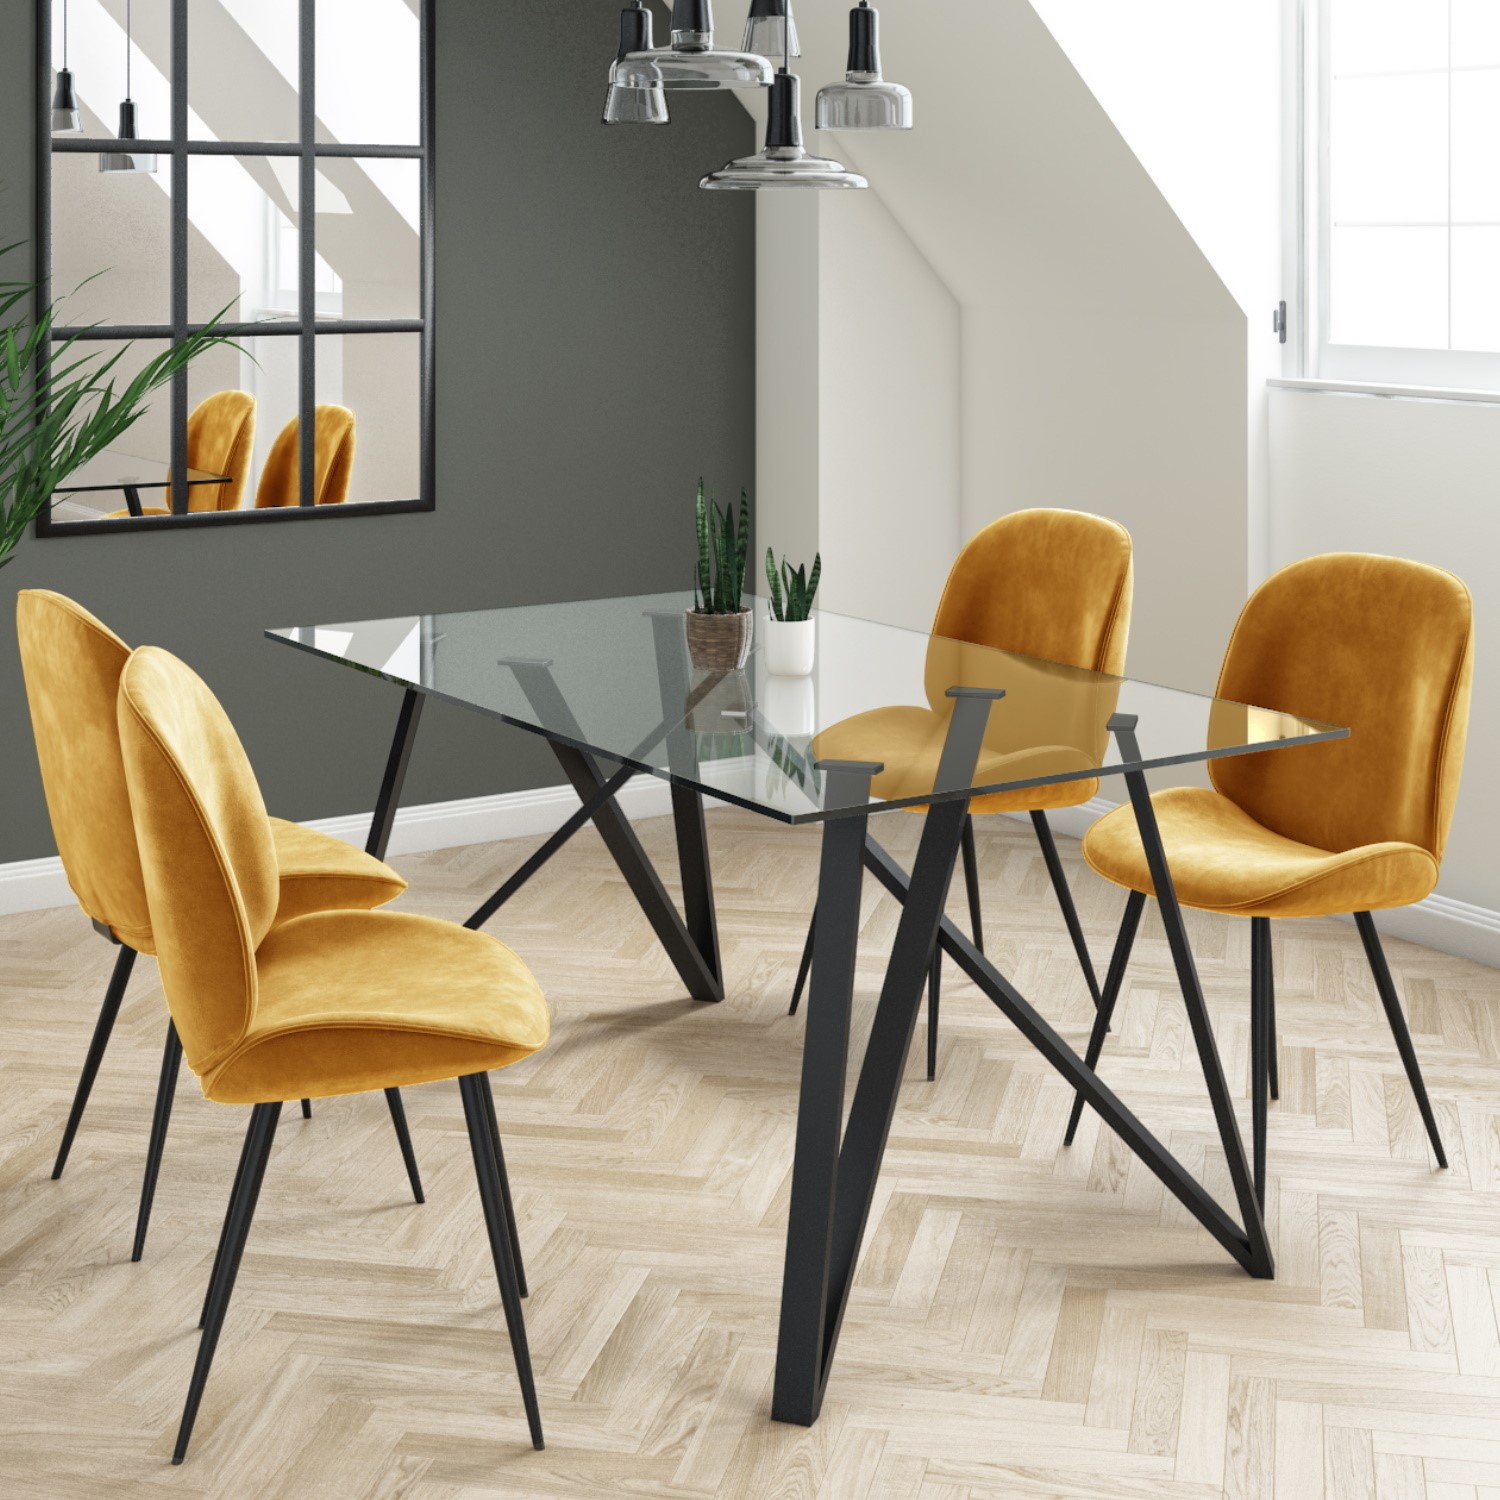 Dax Glass Dining Table With 4 Mustard, Glass Dining Room Table And Chairs Uk